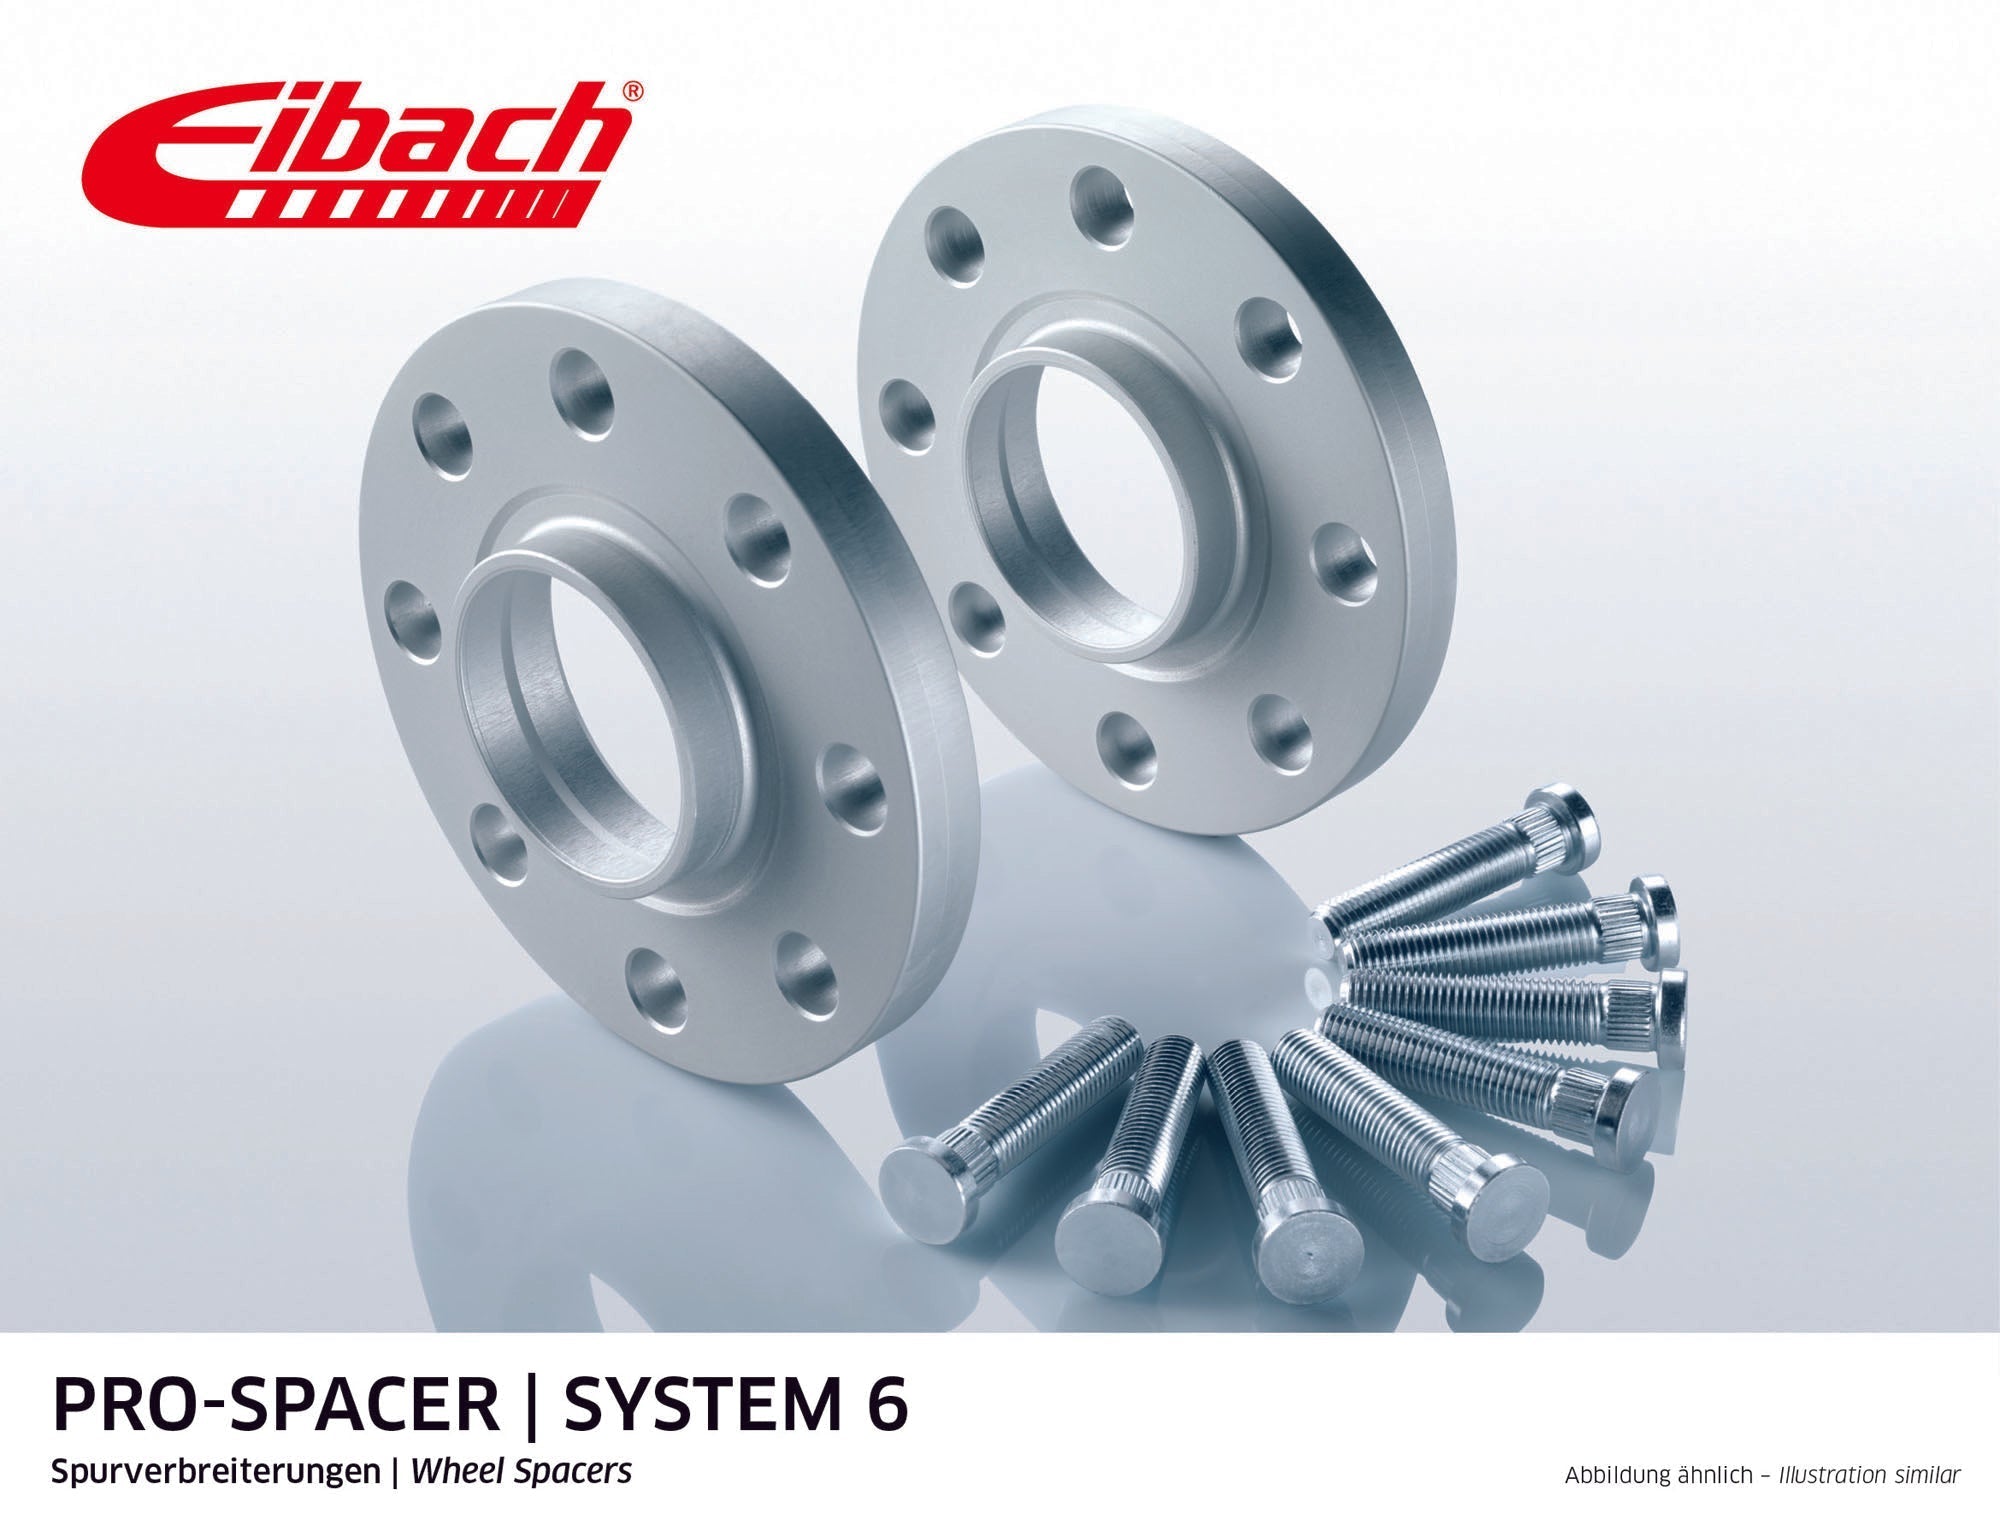 Eibach 15mm Pro-Spacer - Silver Anodized Wheel Spacer 911 1993-97 #S90-6-15-018